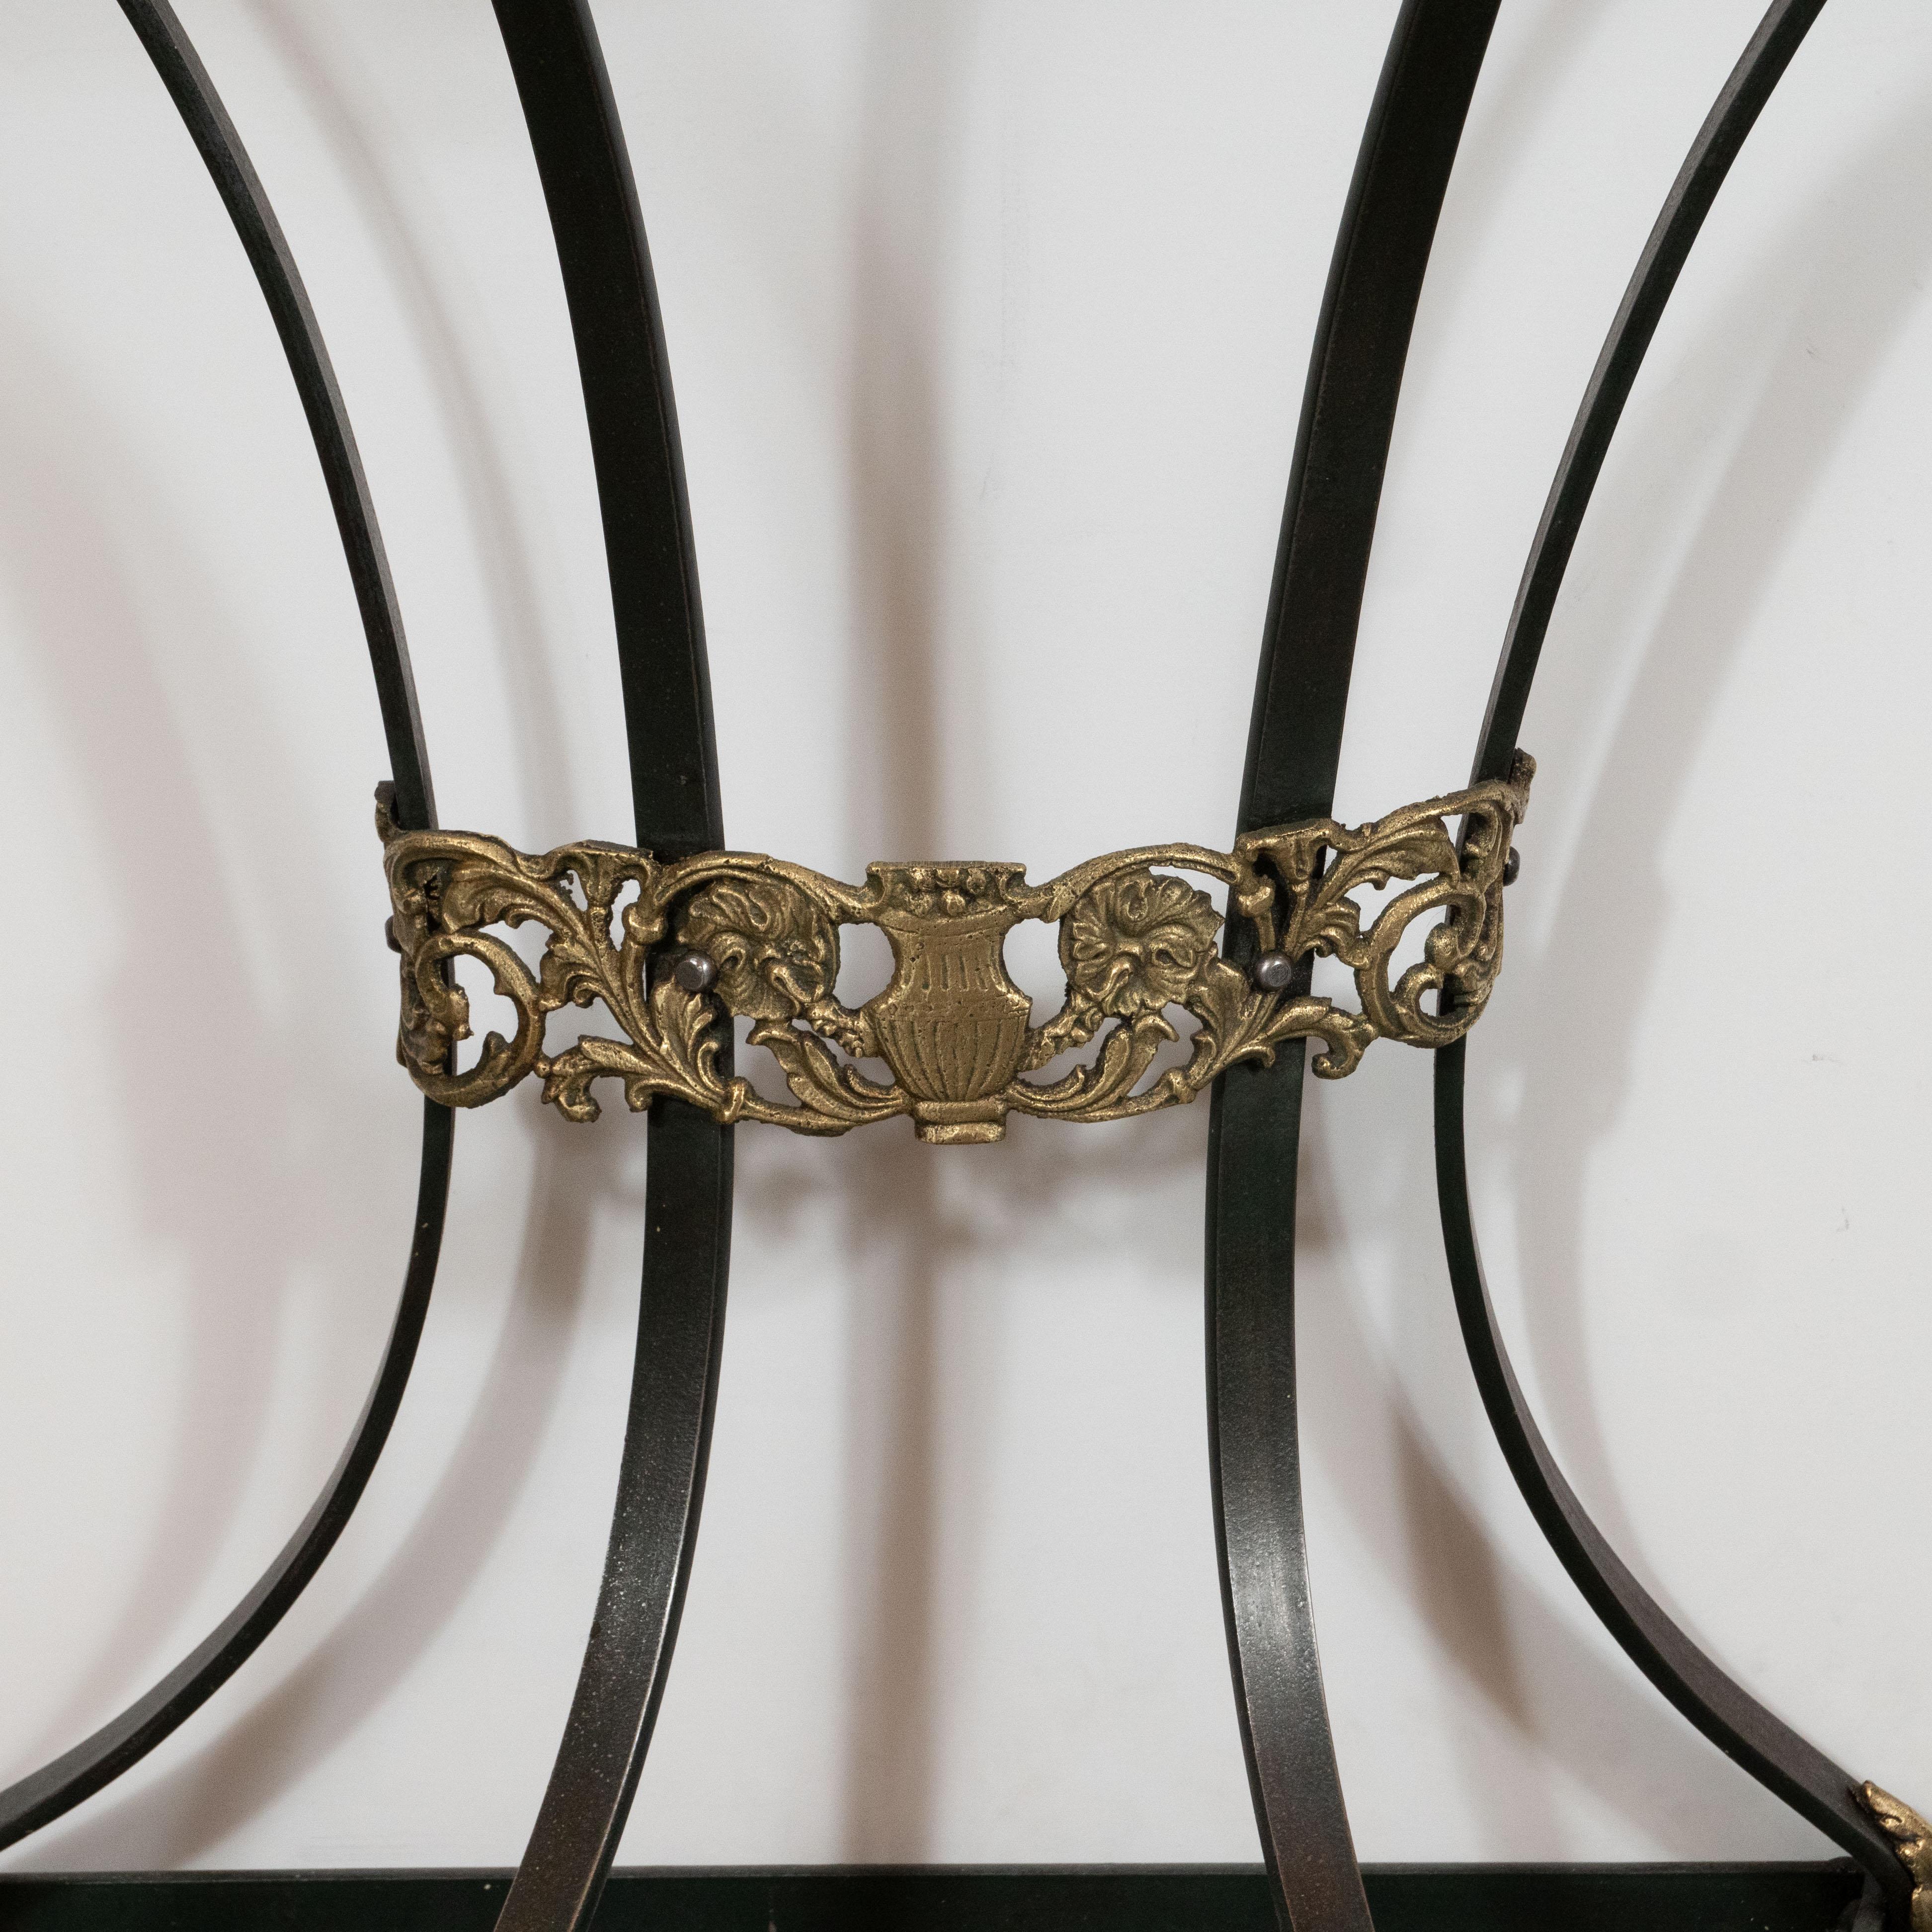 American Art Deco Gilded Bronze and Carrara Marble Console Table with Baroque Detailing